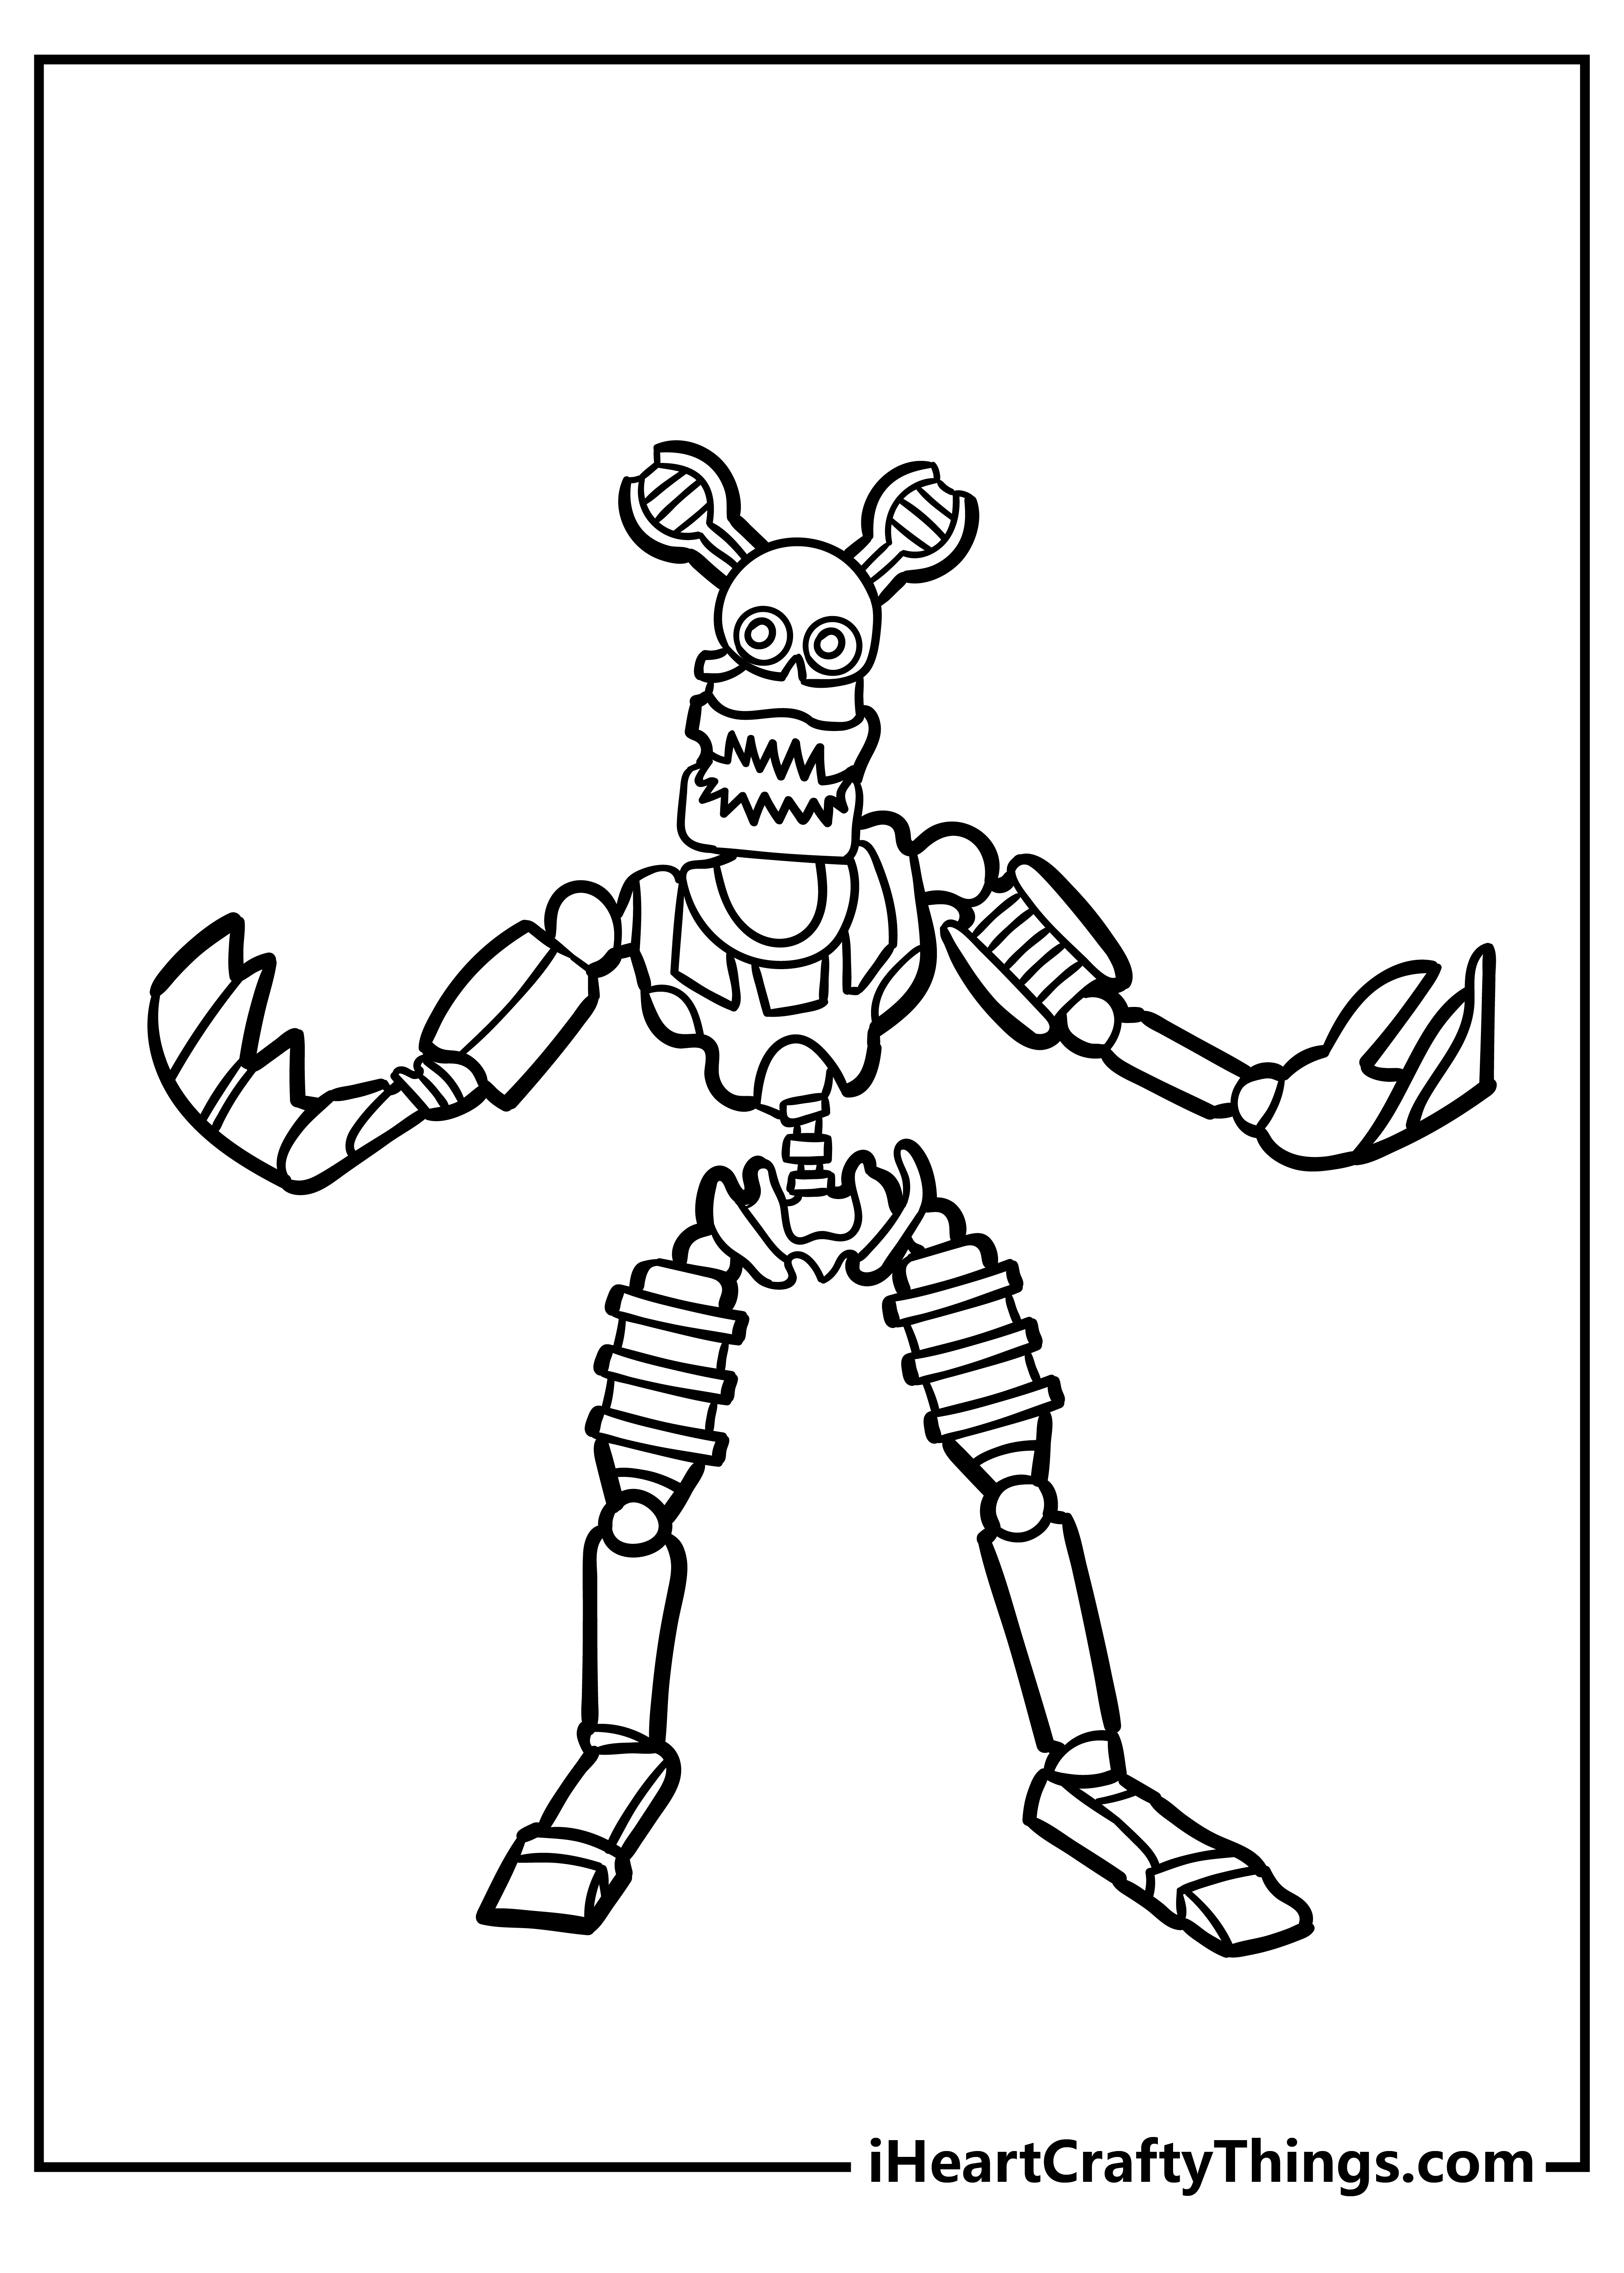 Five Nights At Freddy’s Coloring Sheet for children free download